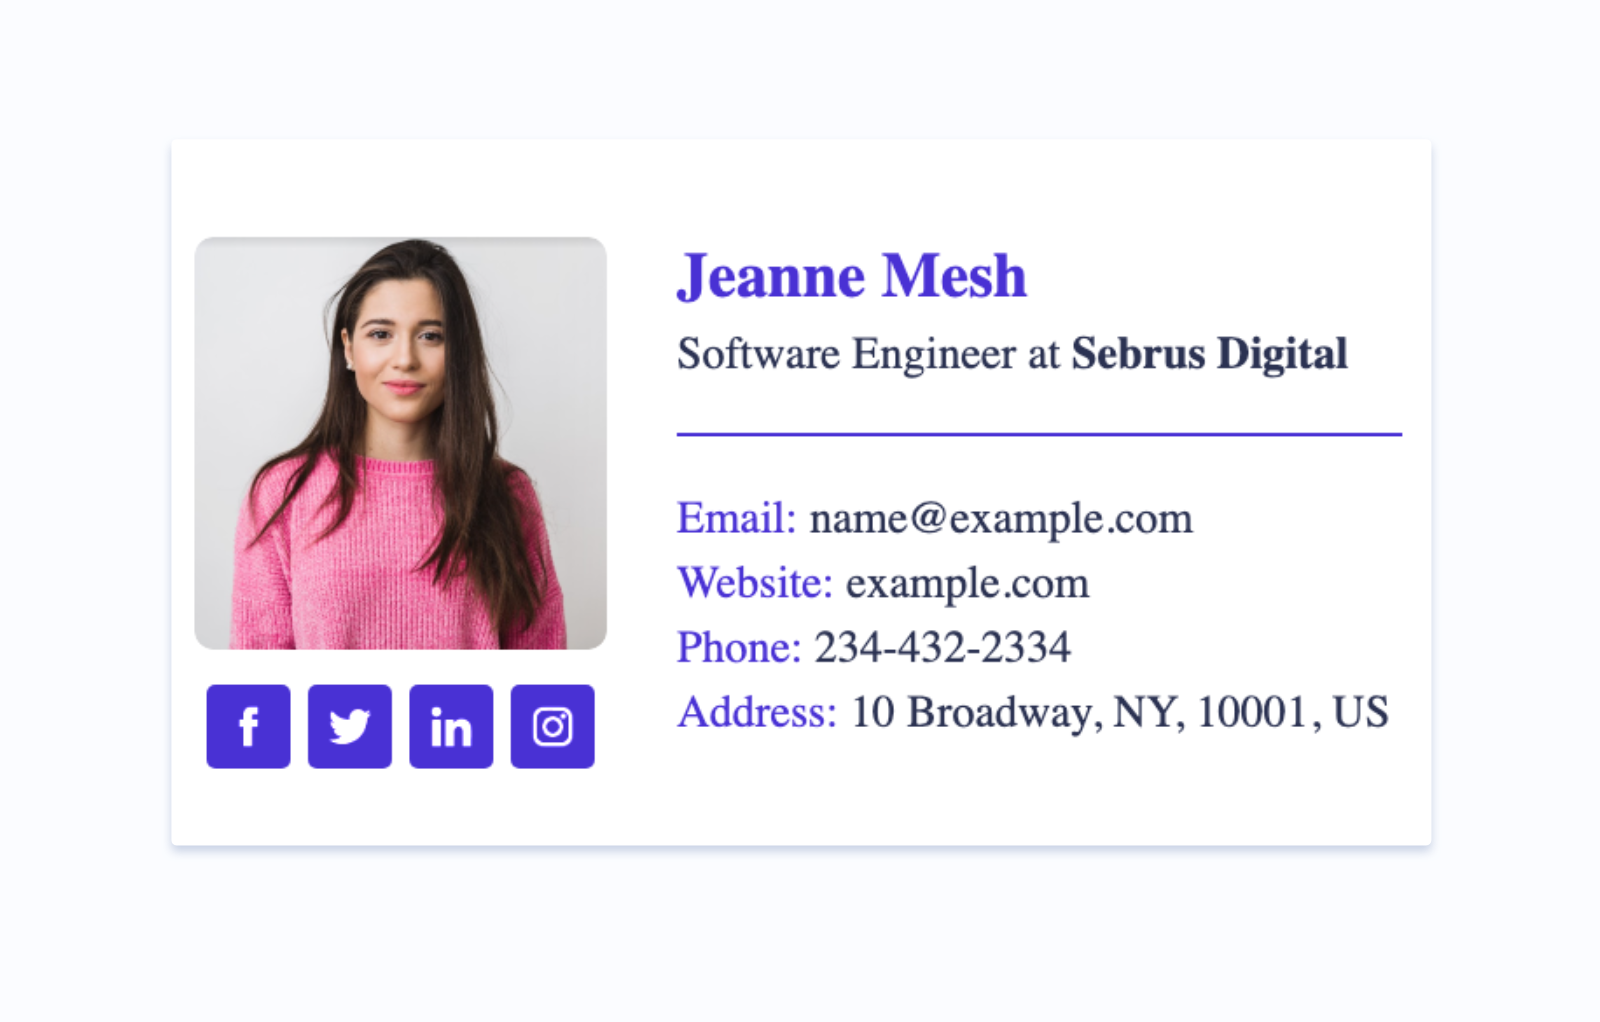 Contact details for your signature footer